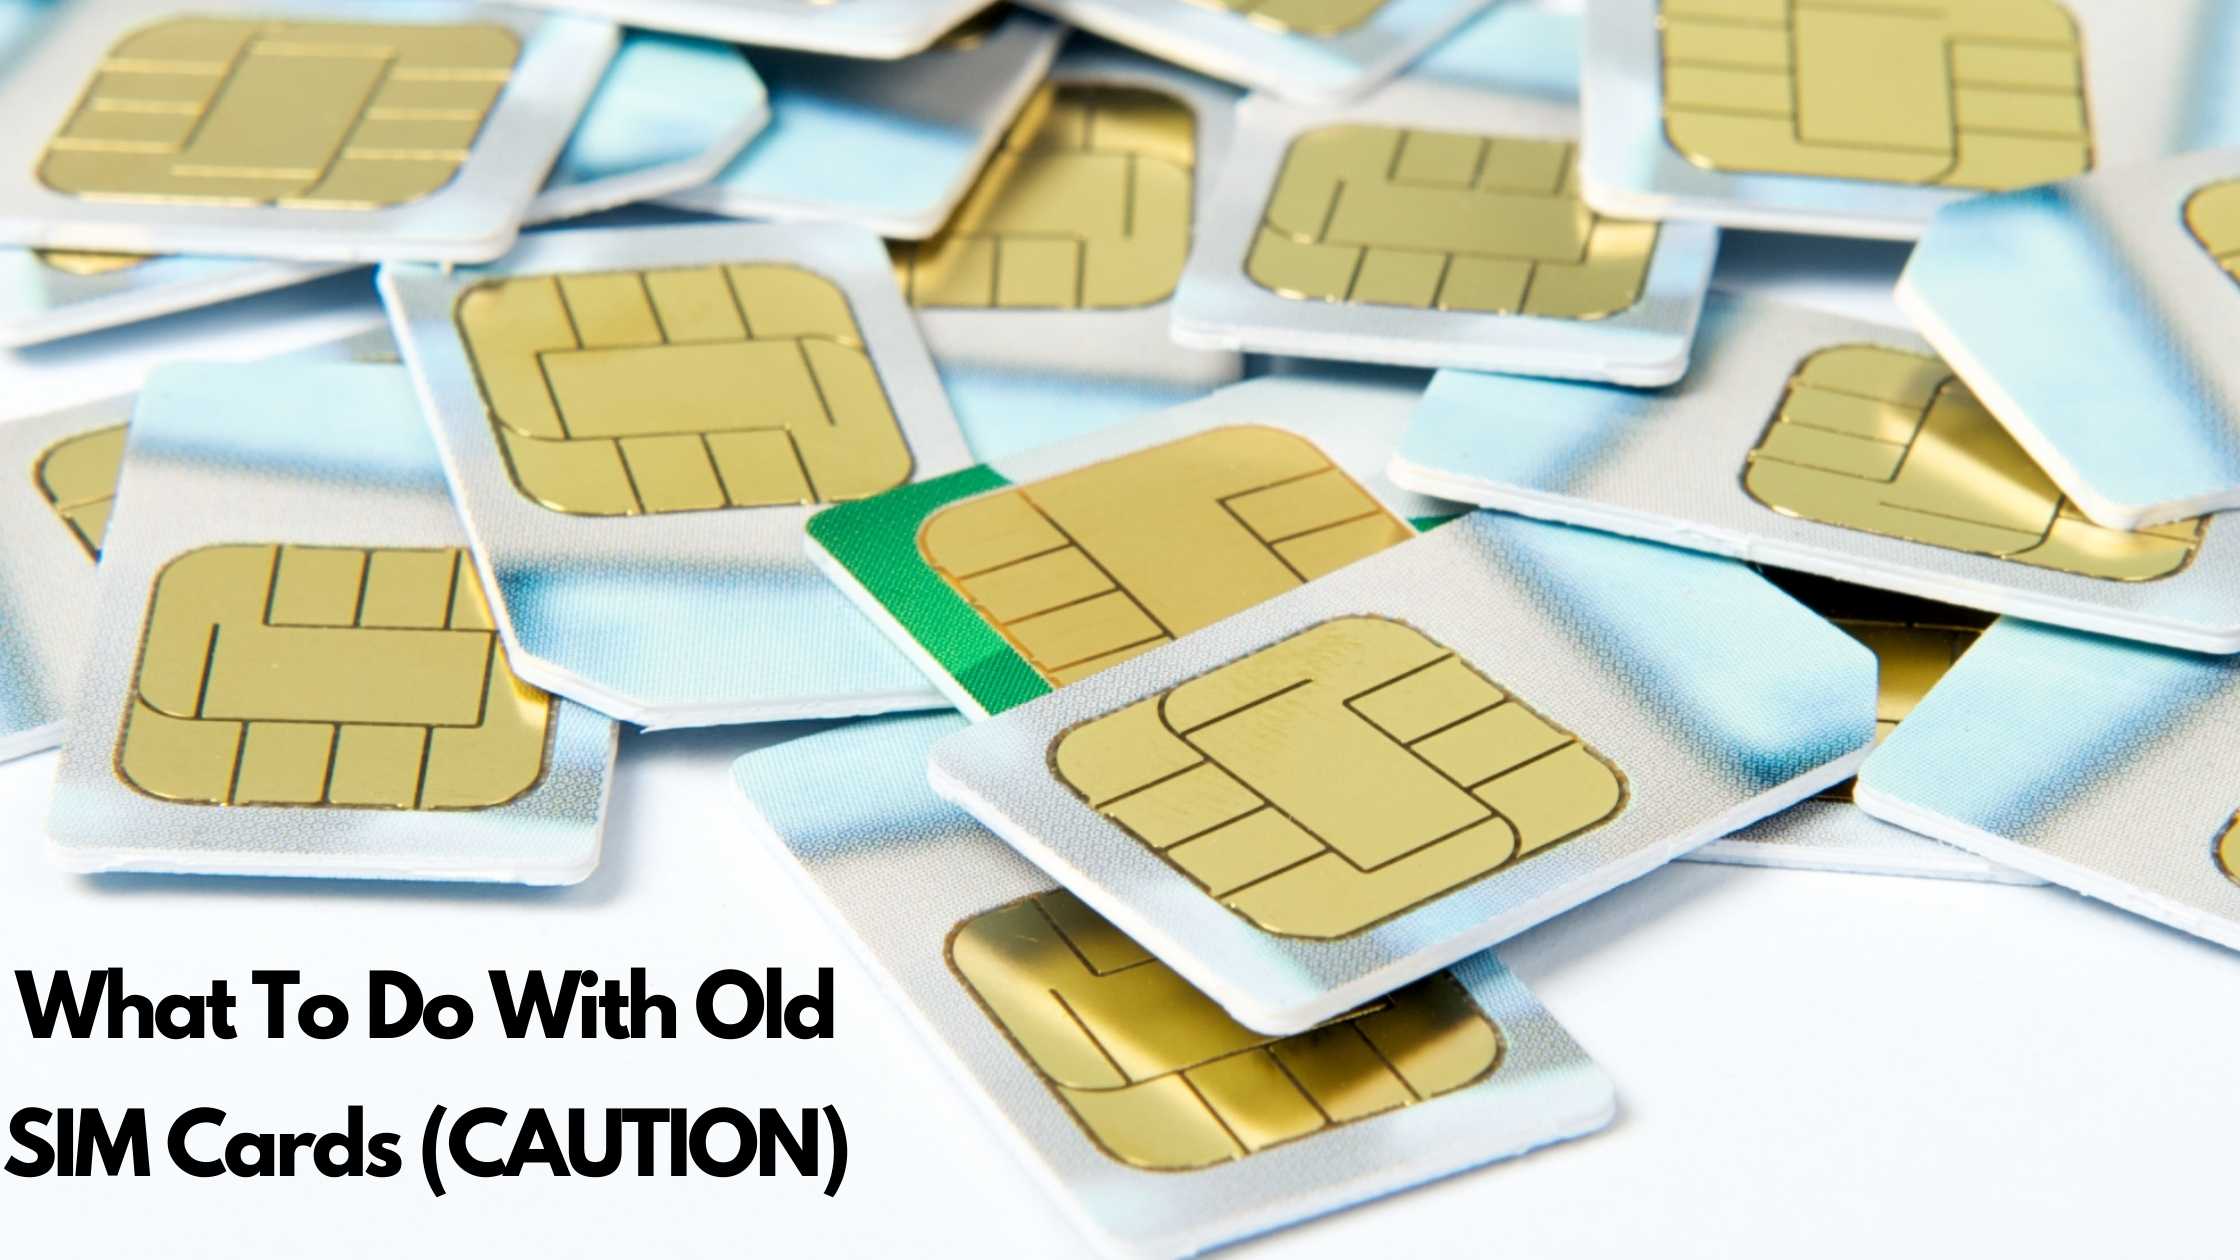 How many times can you reuse a SIM card?